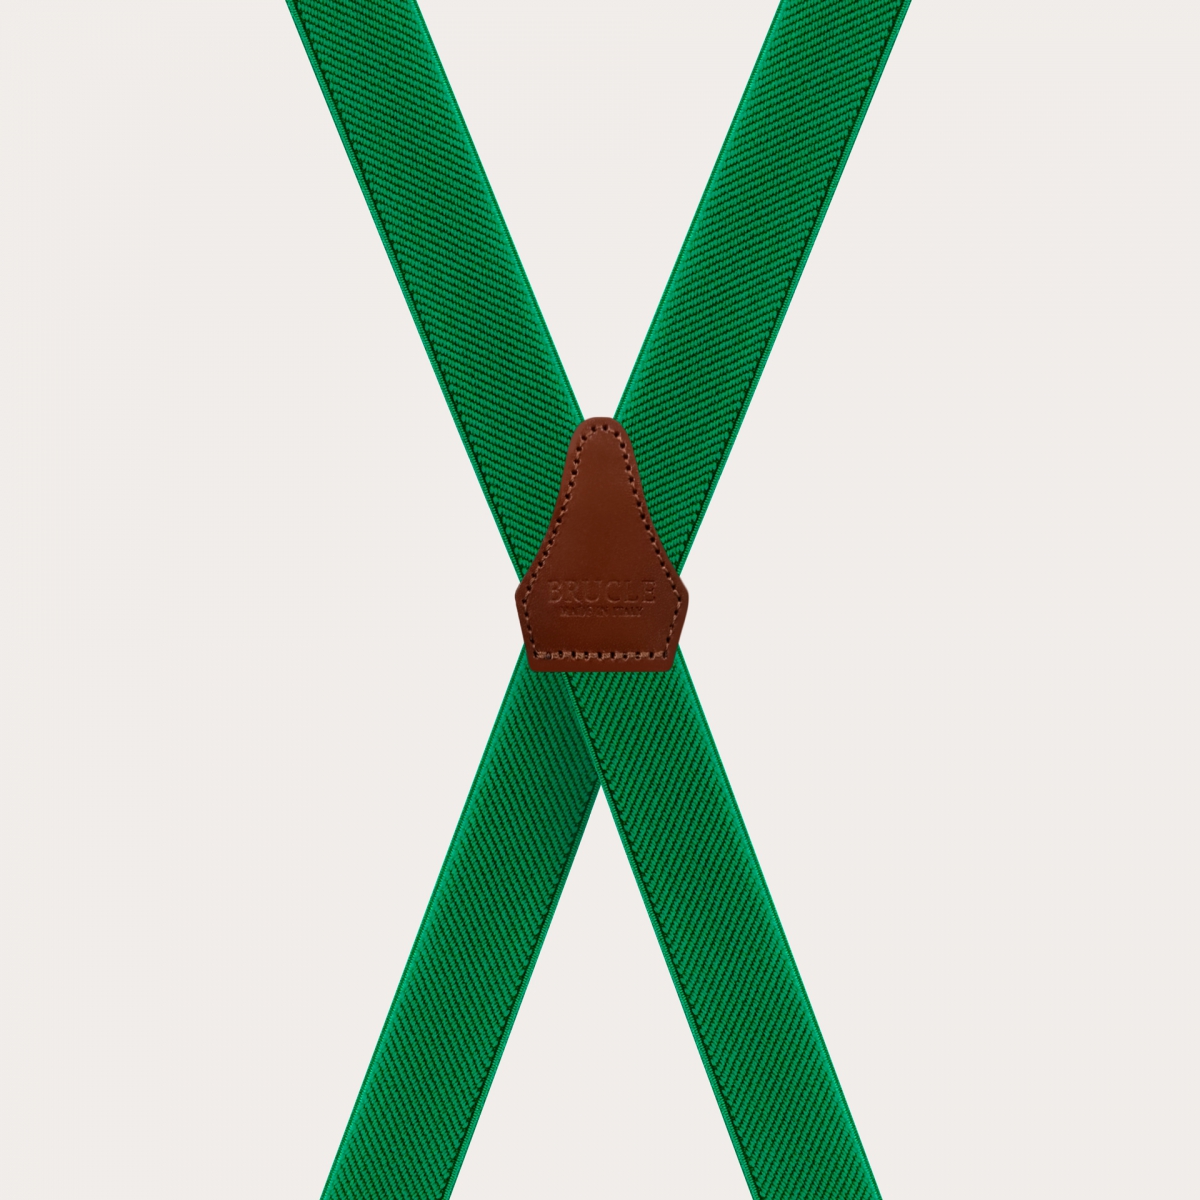 BRUCLE Stylish green X suspenders for men and women